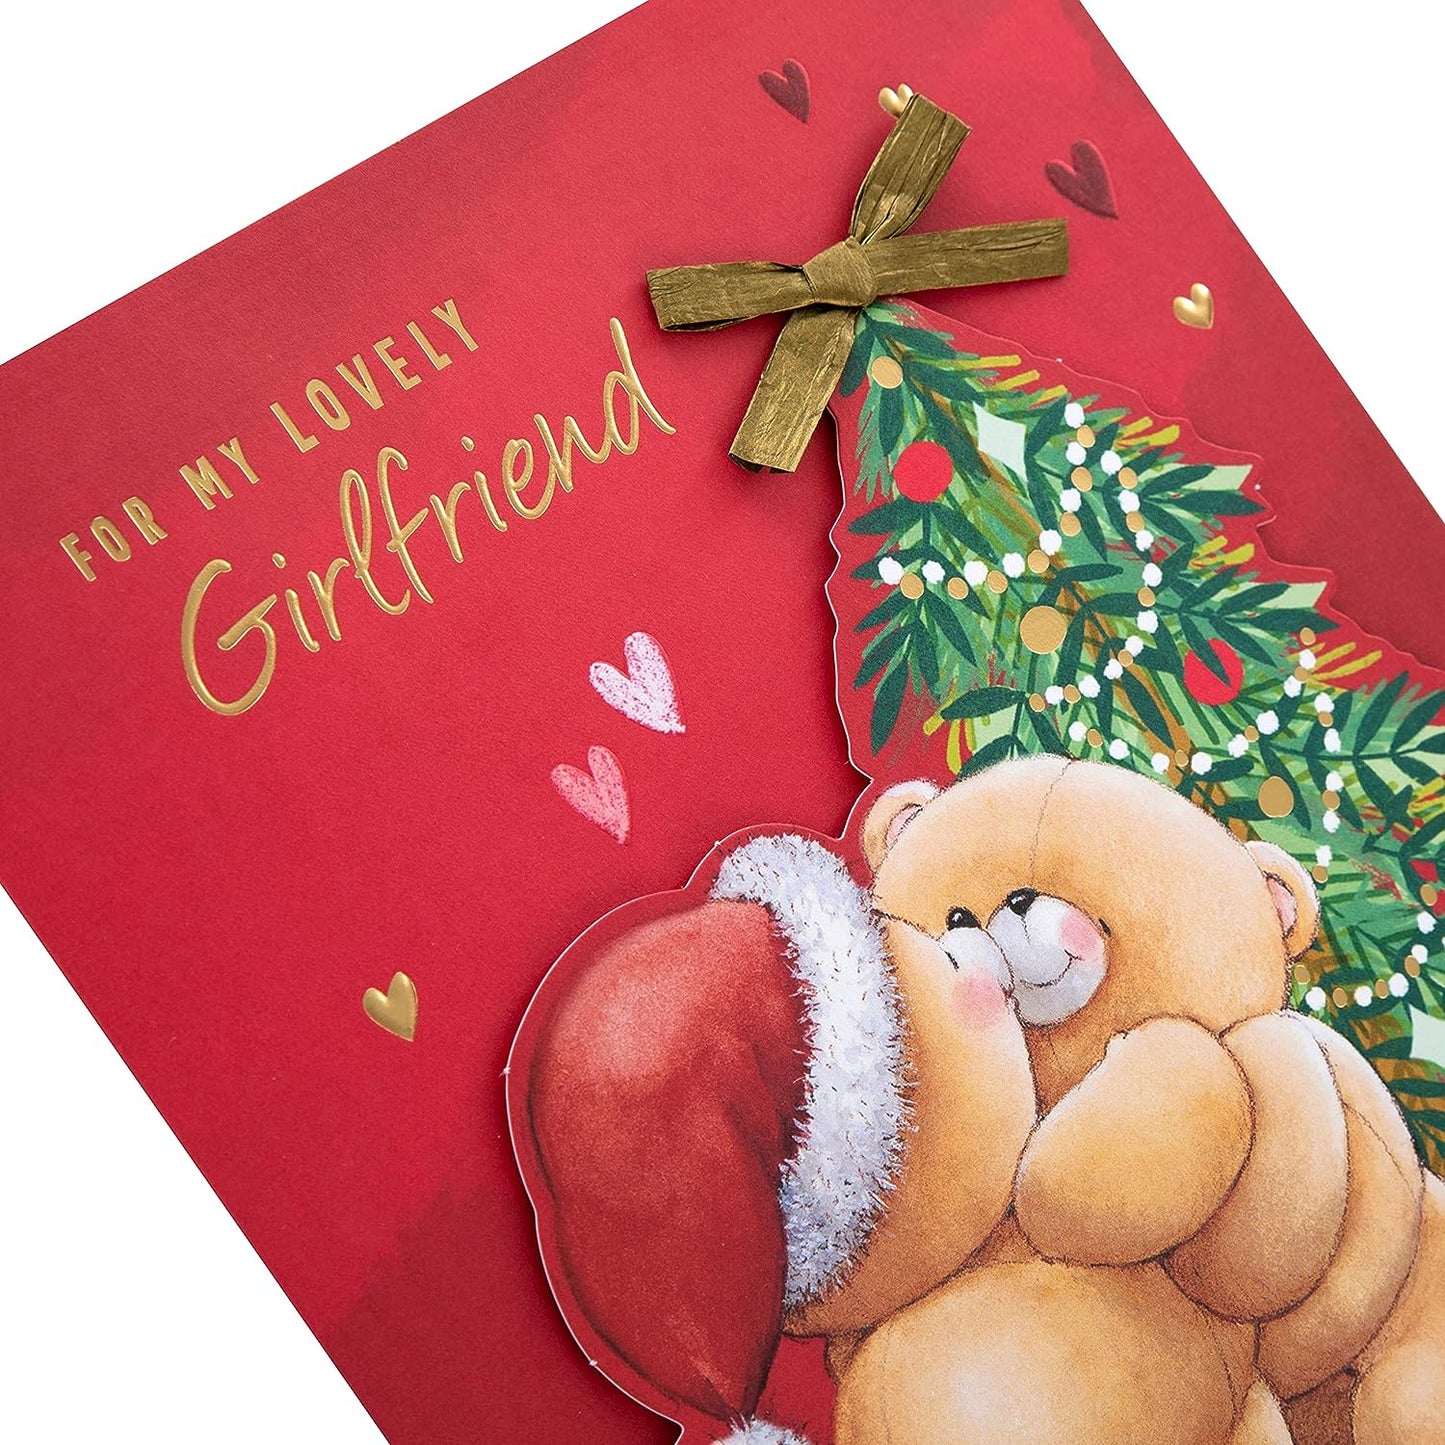 Cute Forever Friends with Hearts Design For Girlfriend Boxed Christmas Card